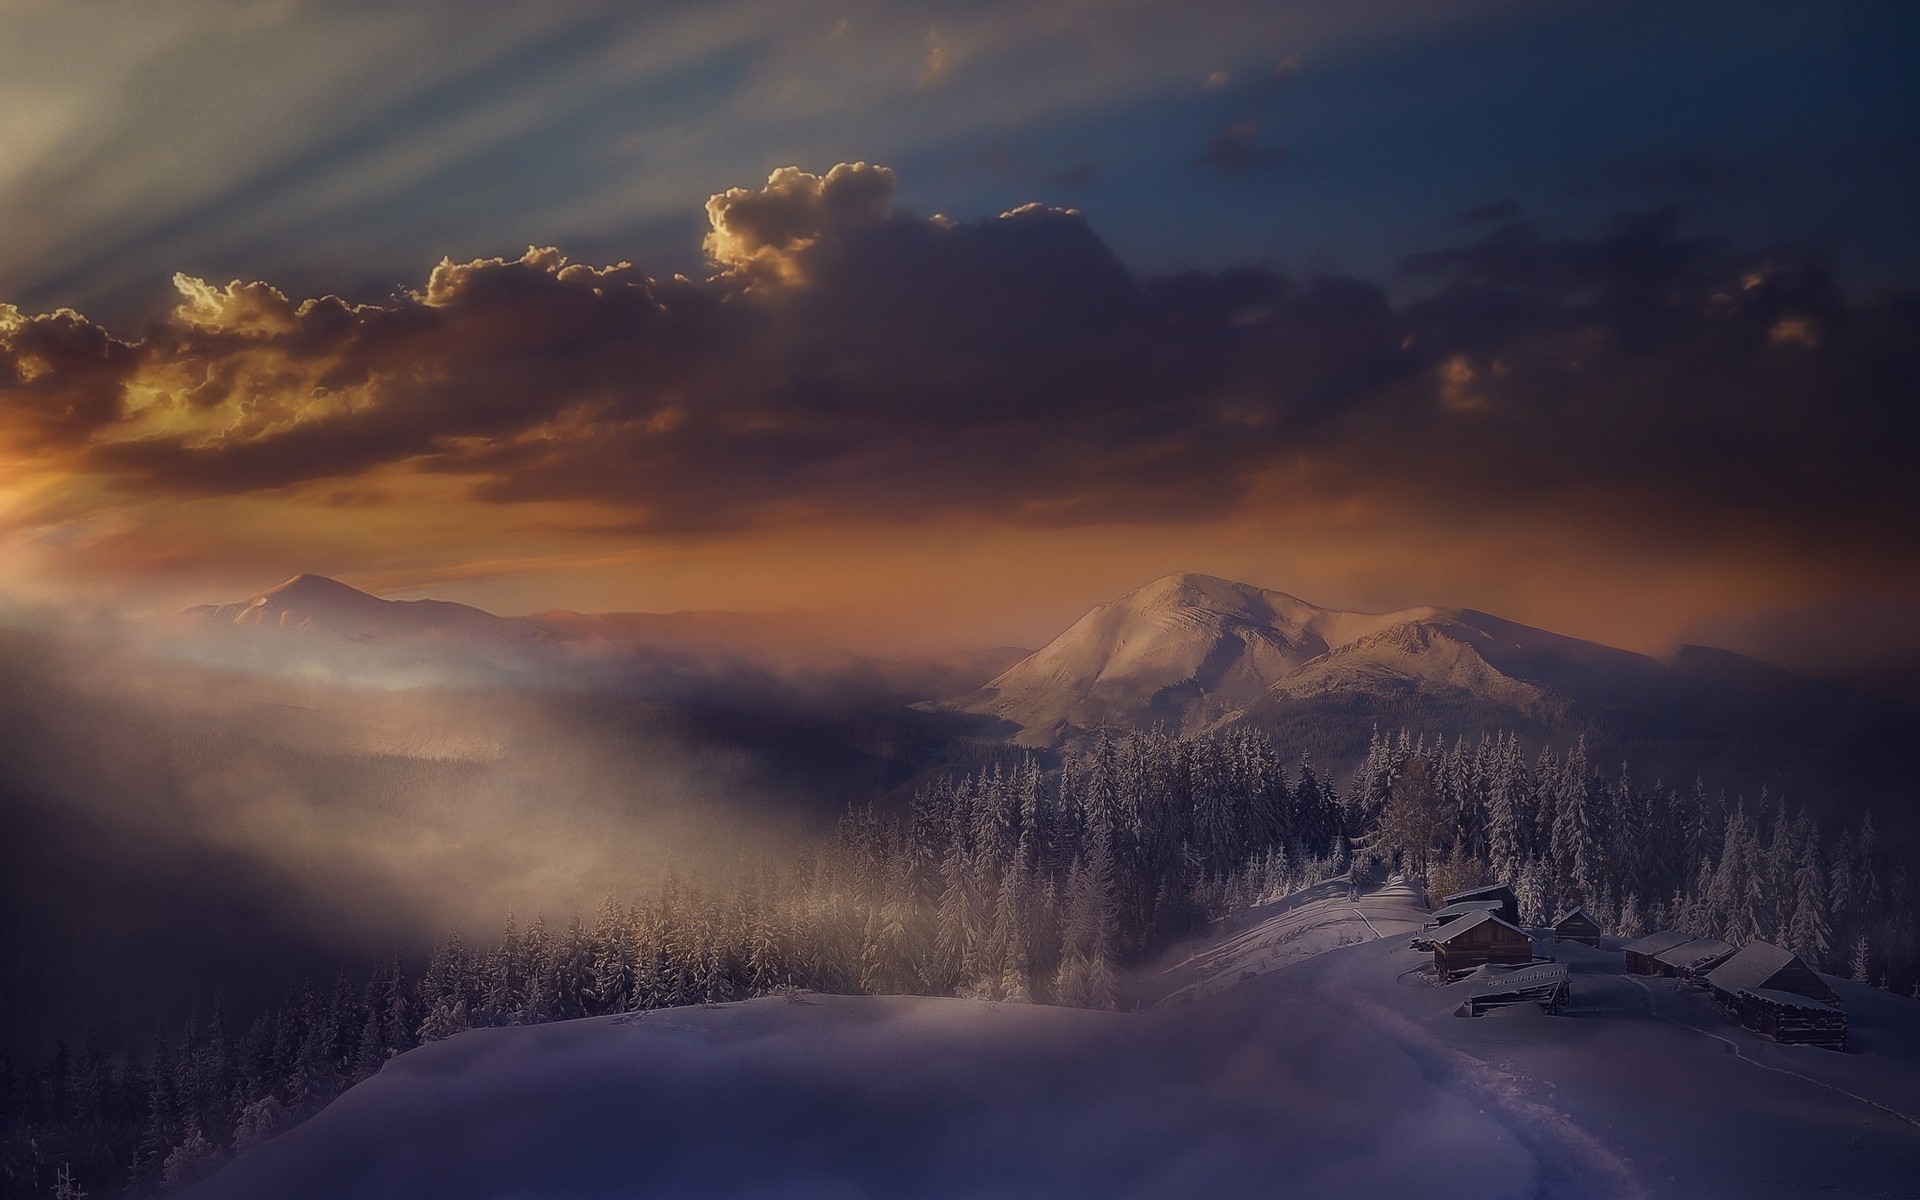 General 1920x1200 landscape nature sunset winter mist Alps mountains cabin Italy sky sunlight forest snow clouds snowy peak snowy mountain low light